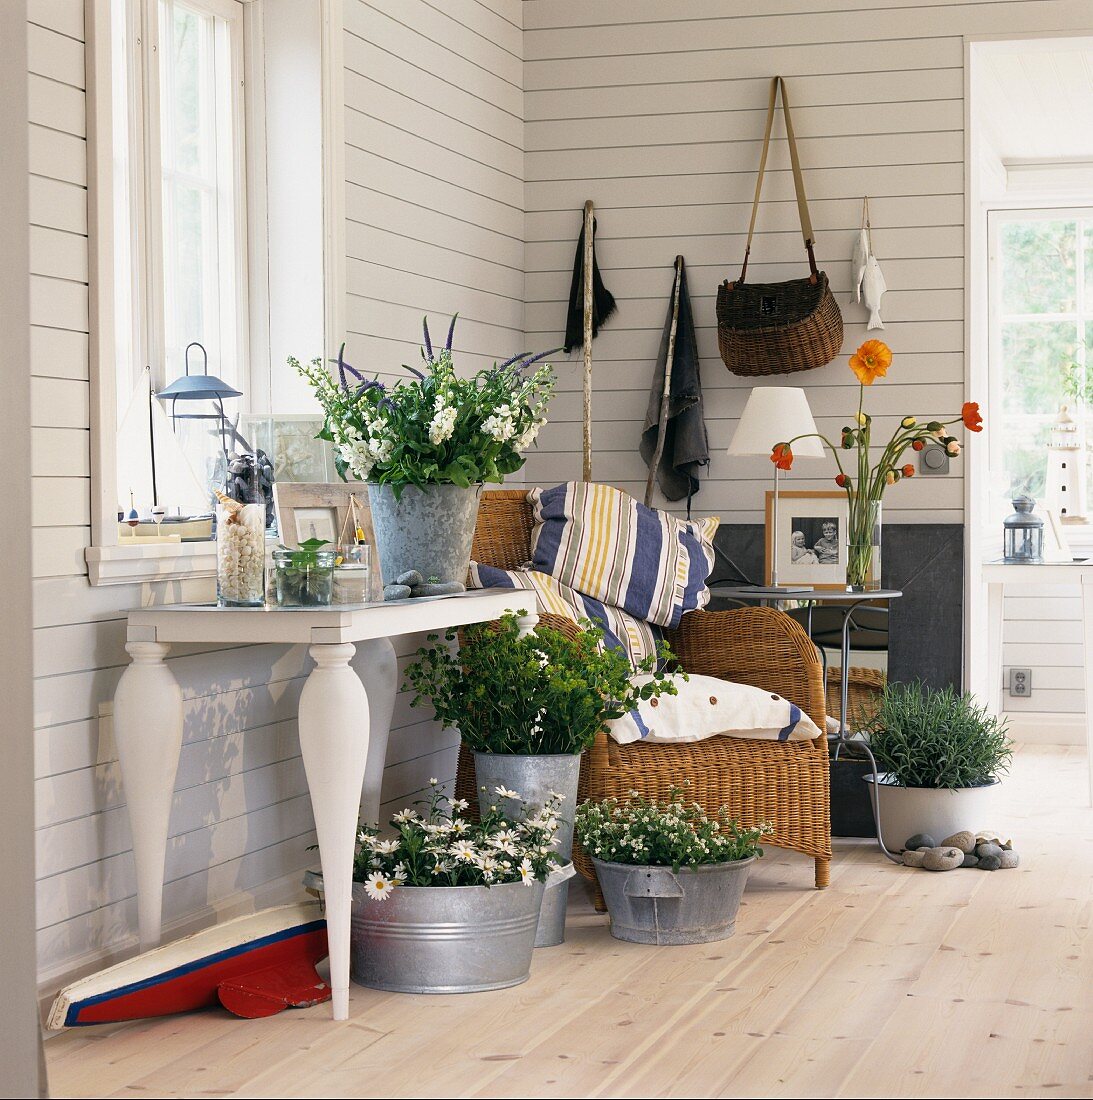 Various plants and bouquets in zinc containers, wicker chair and console table in white, wood-panelled country house